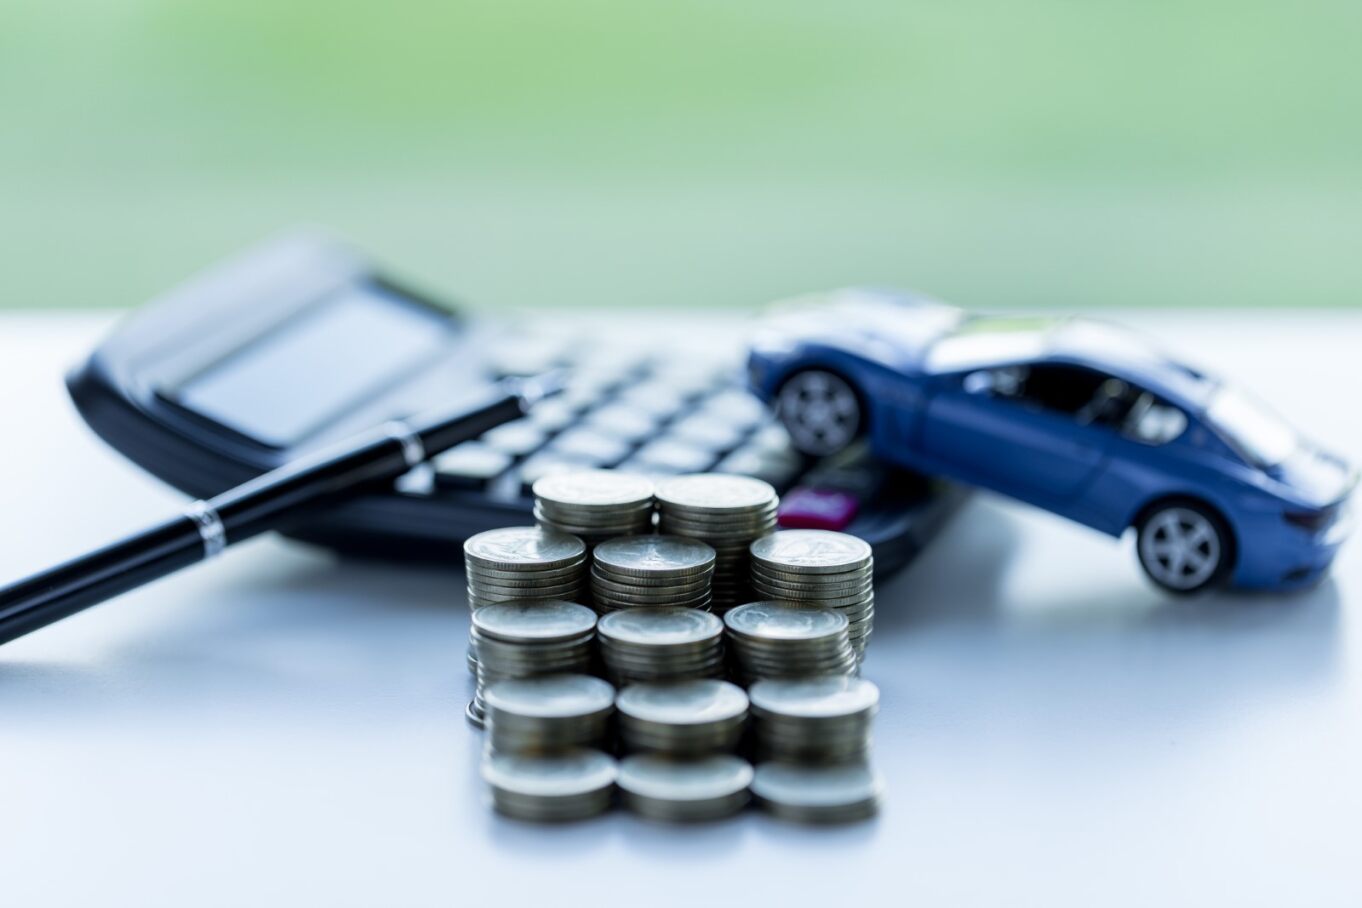 several stacks of coins, a calculator, a pen and a toy car